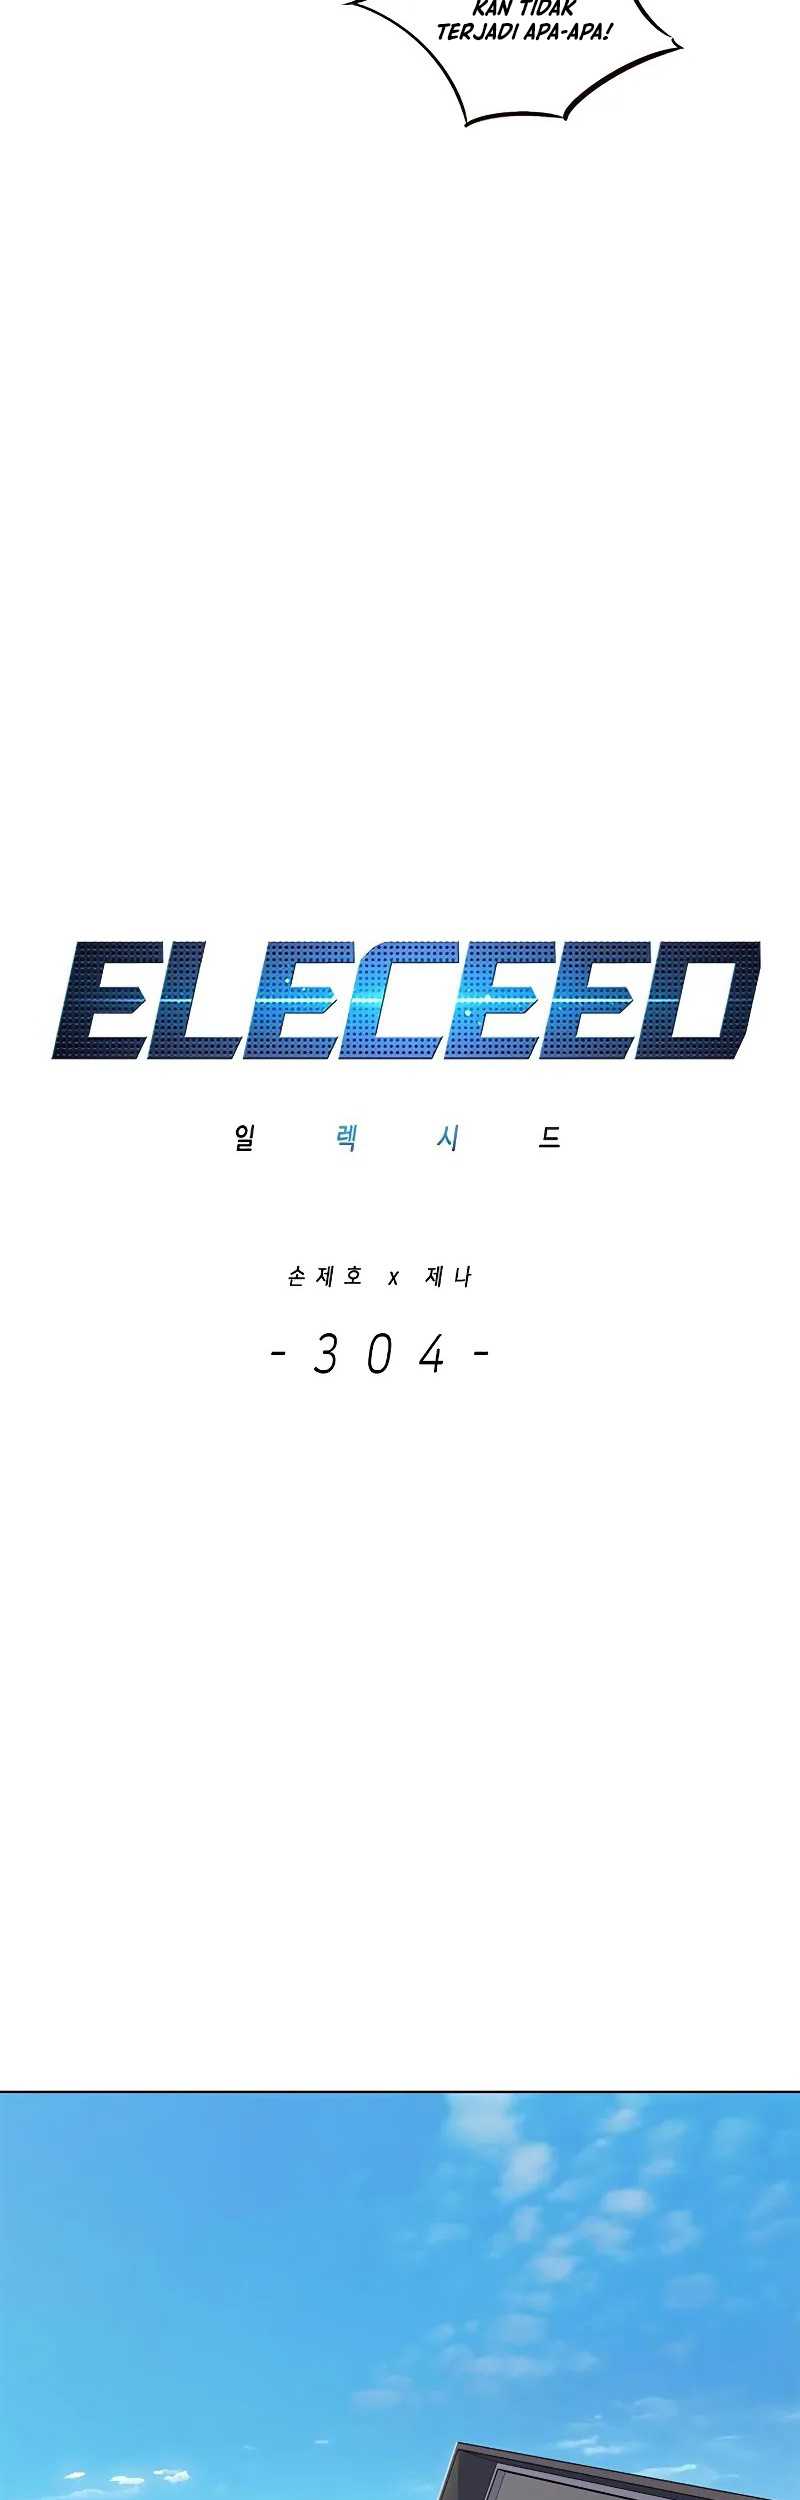 Eleceed Chapter 304